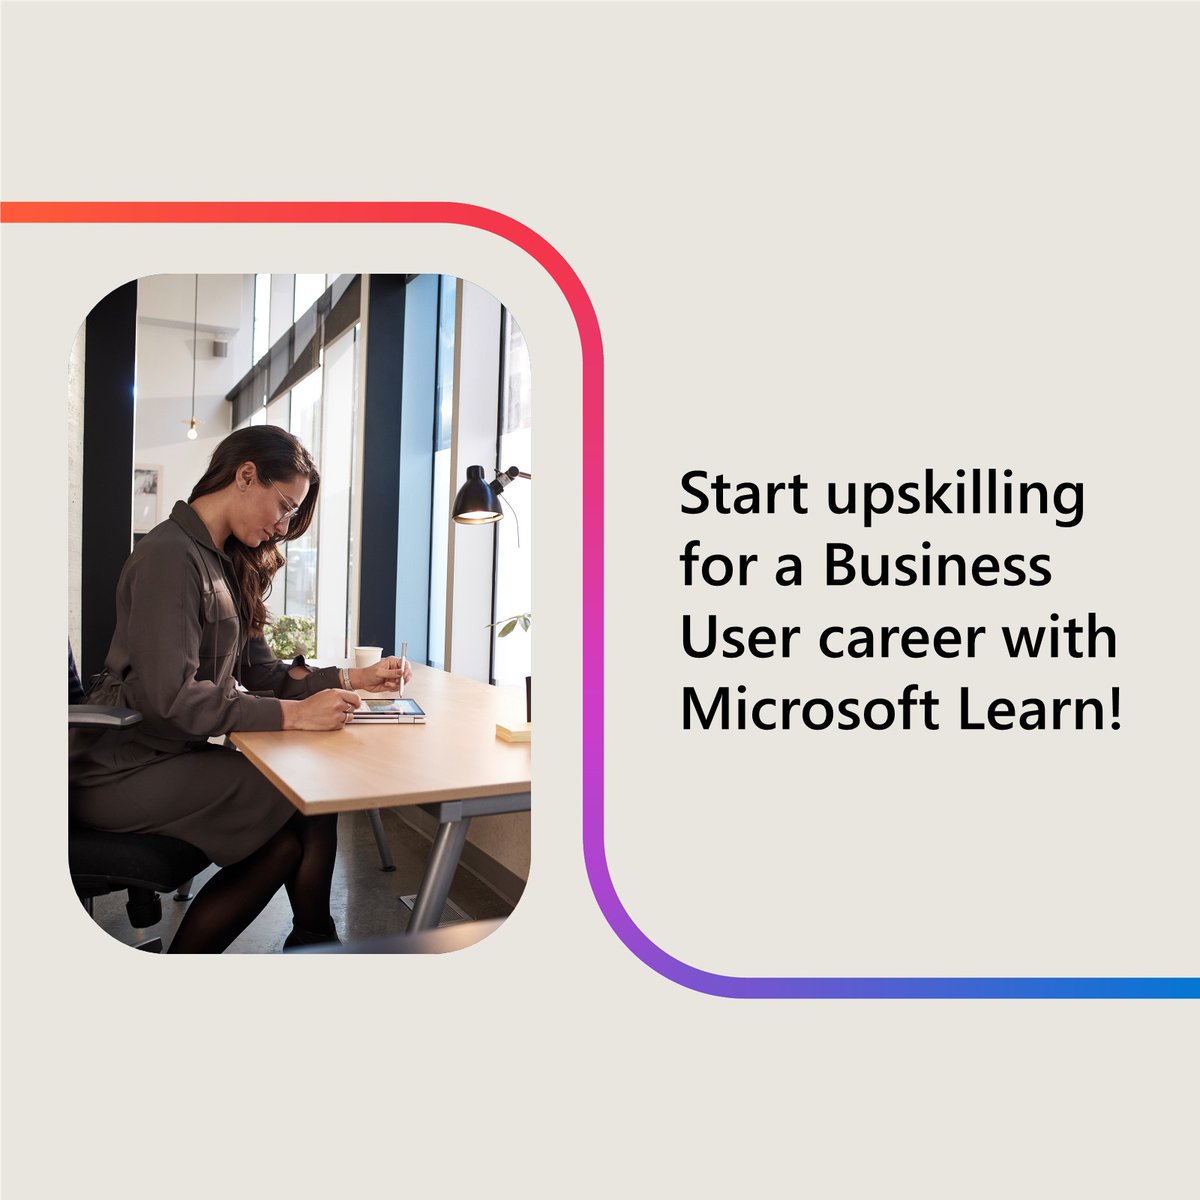 You love Microsoft 365, Dynamics 365, and AI—but did you know you can make a career out of it? 😍 As a Business User, you can leverage these tools to meet business needs. 🏆 Explore training for this career path: msft.it/60149unVe